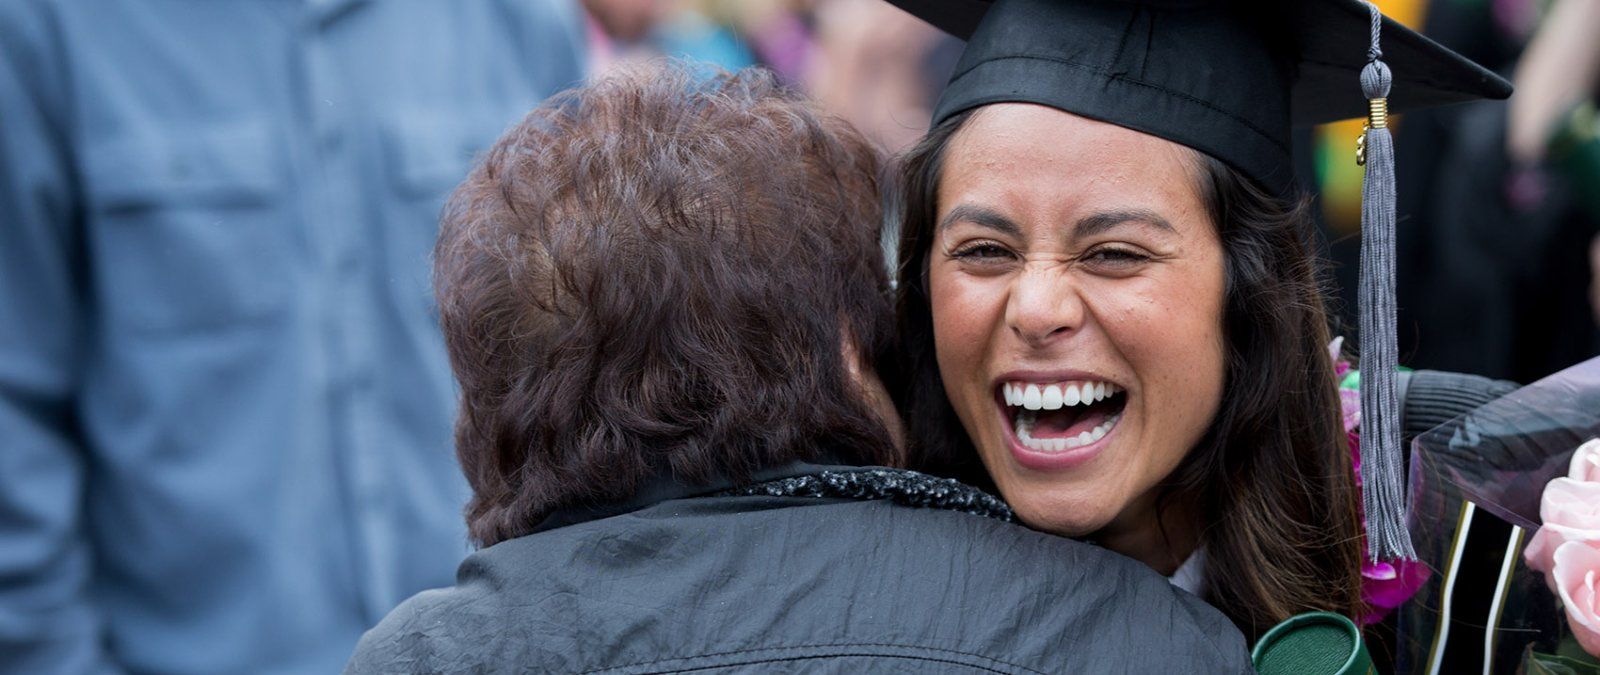 A PLNU graduate student is embraced by a grandparent after commencement.